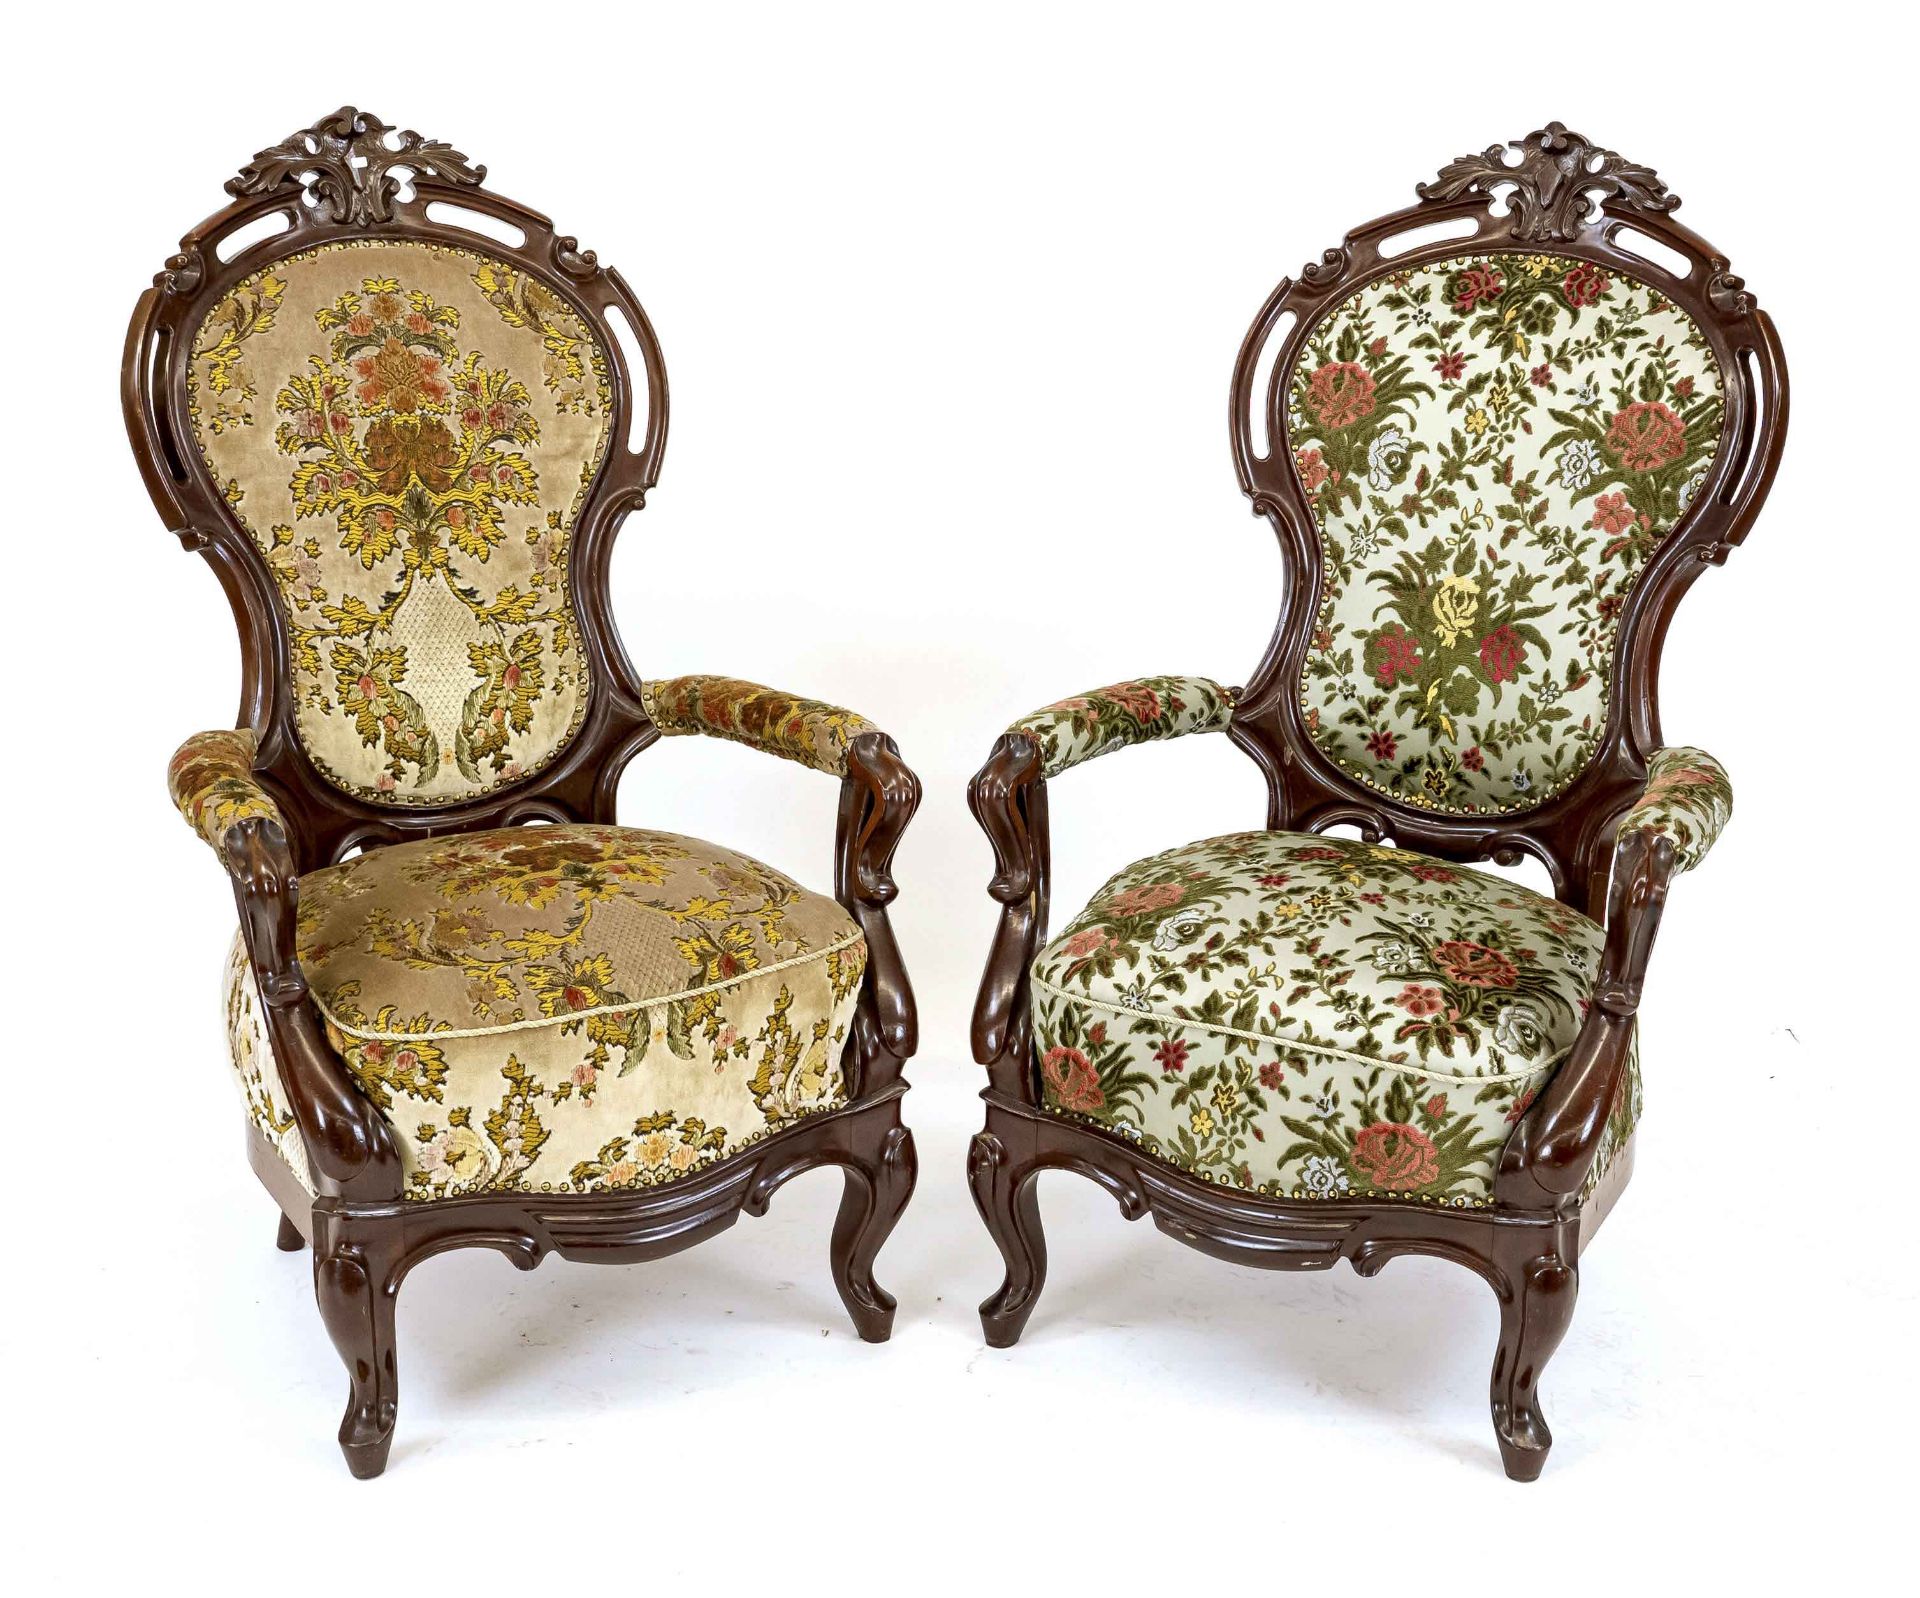 Pair of armchairs, Louis-Philippe c. 1860, mahogany, various covers, 114 x 67 x 70 cm.